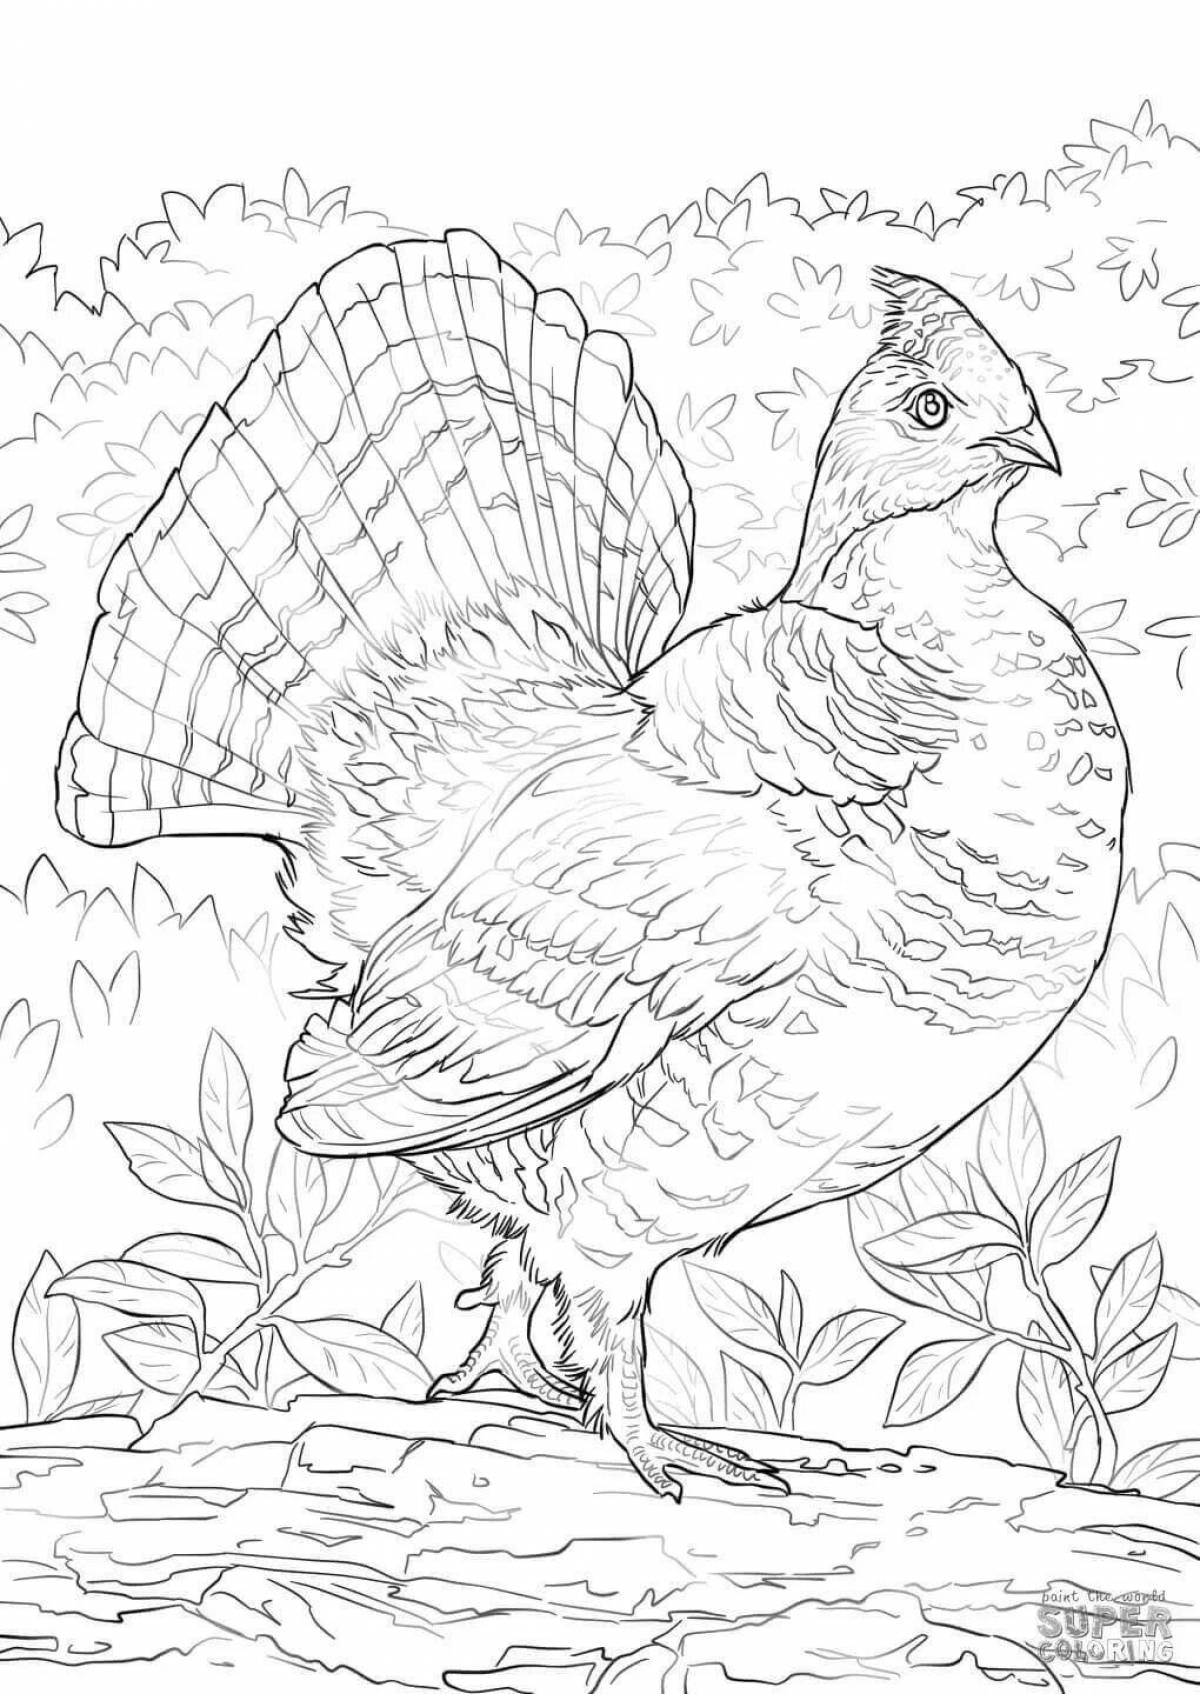 Incredible capercaillie coloring book for kids